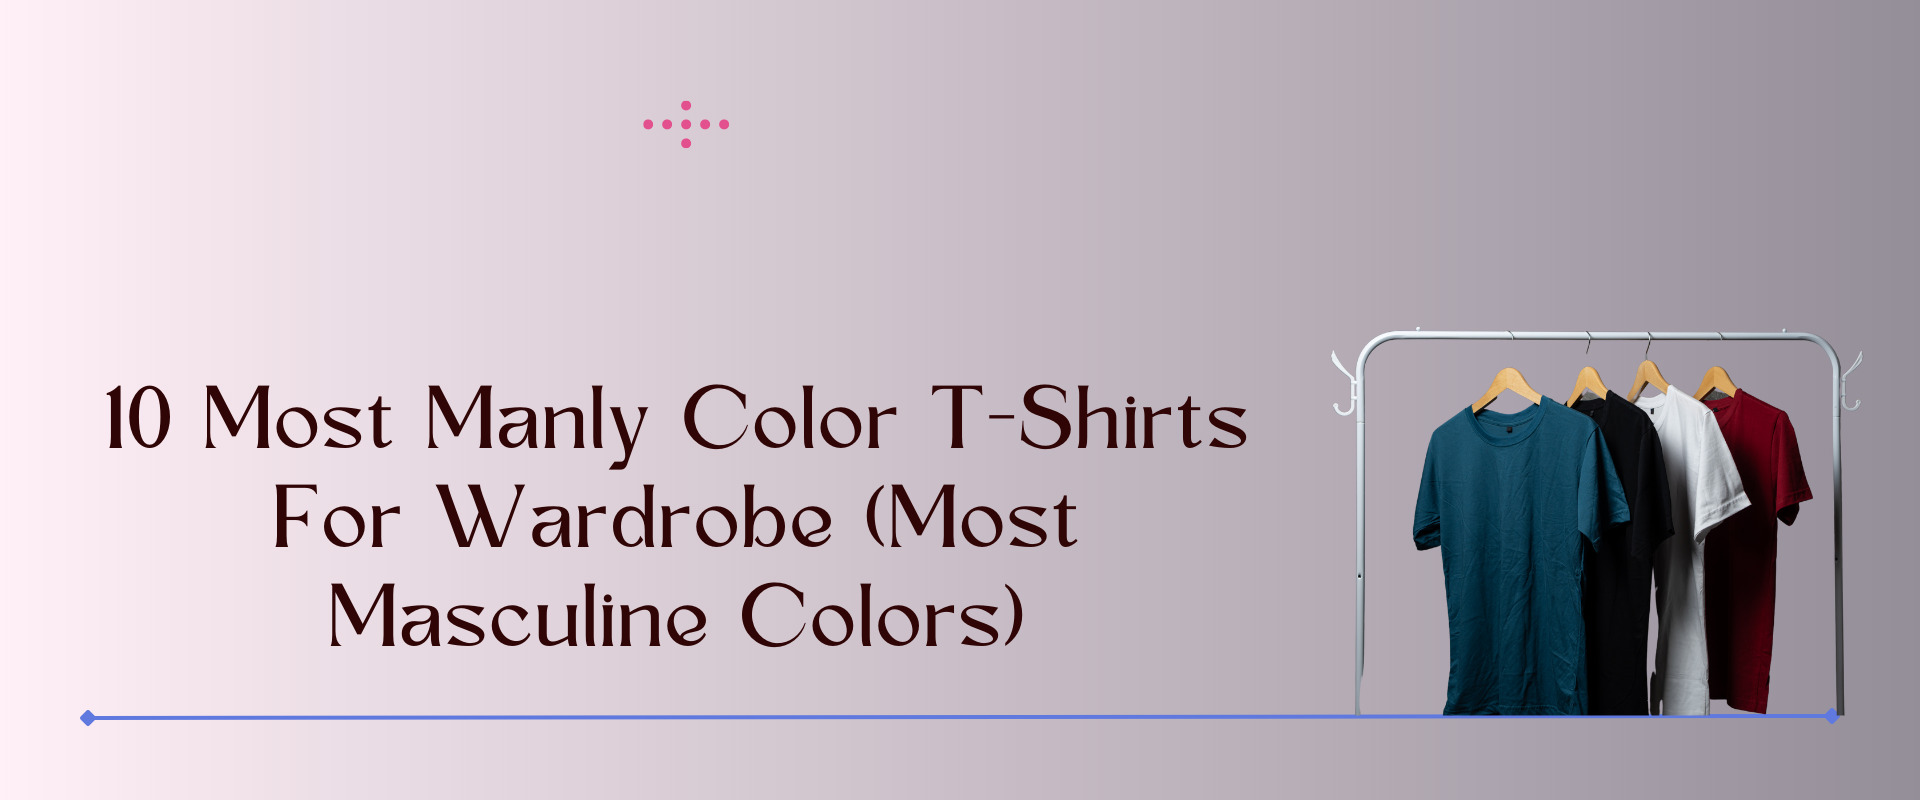 most manly color tshirts